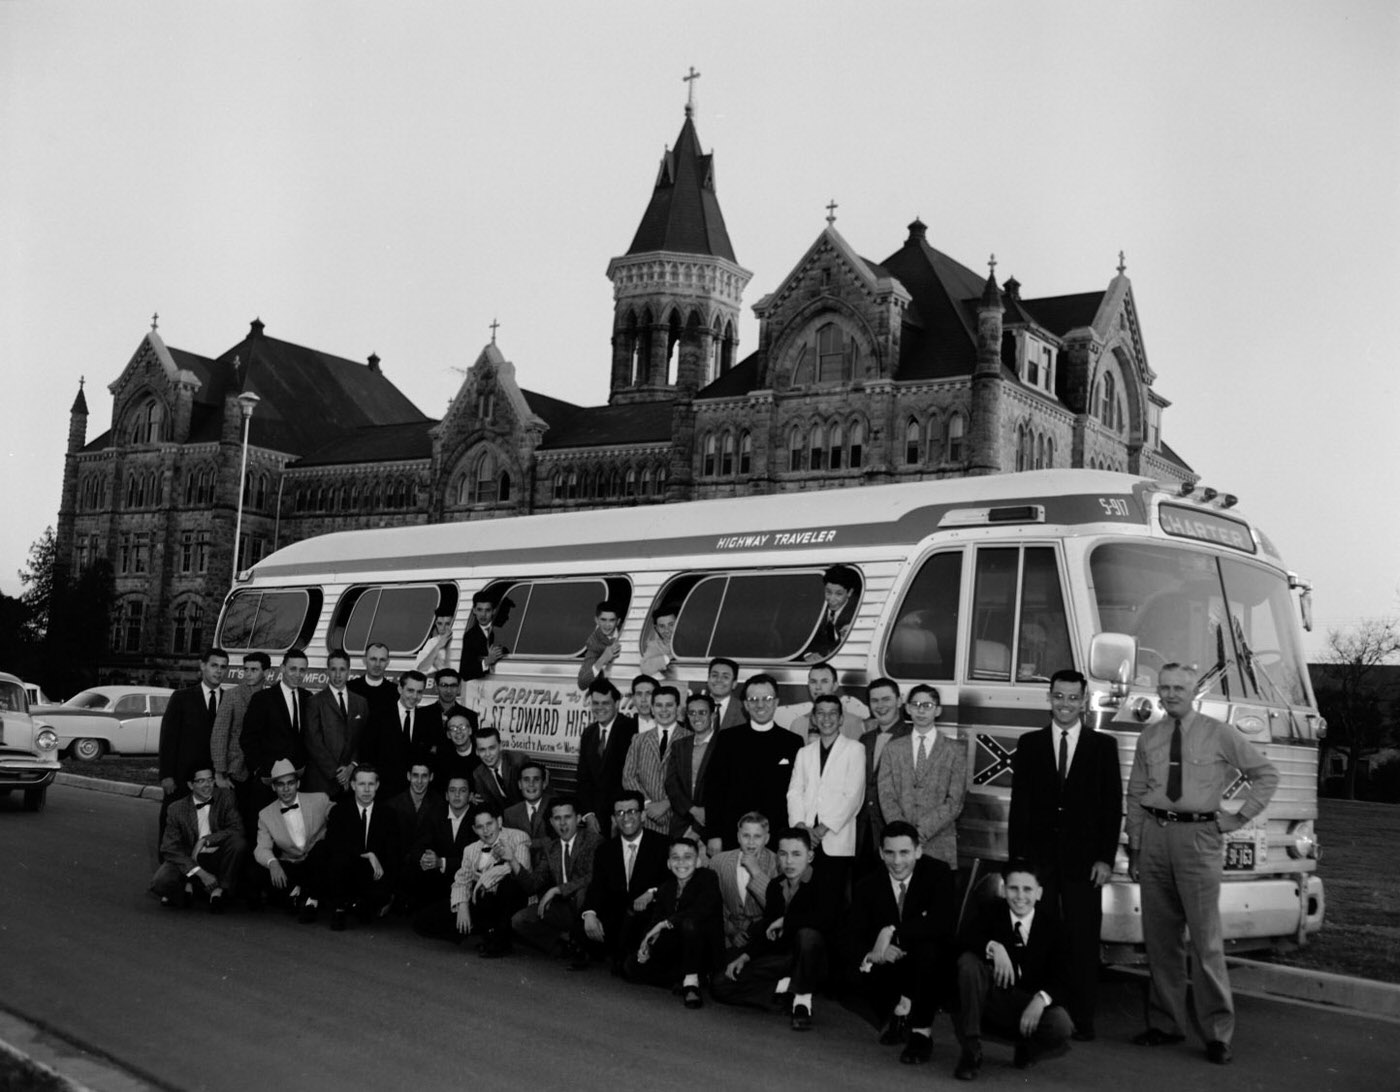 Students and Staff Leaving for Washington from St. Edwards University, 1959.